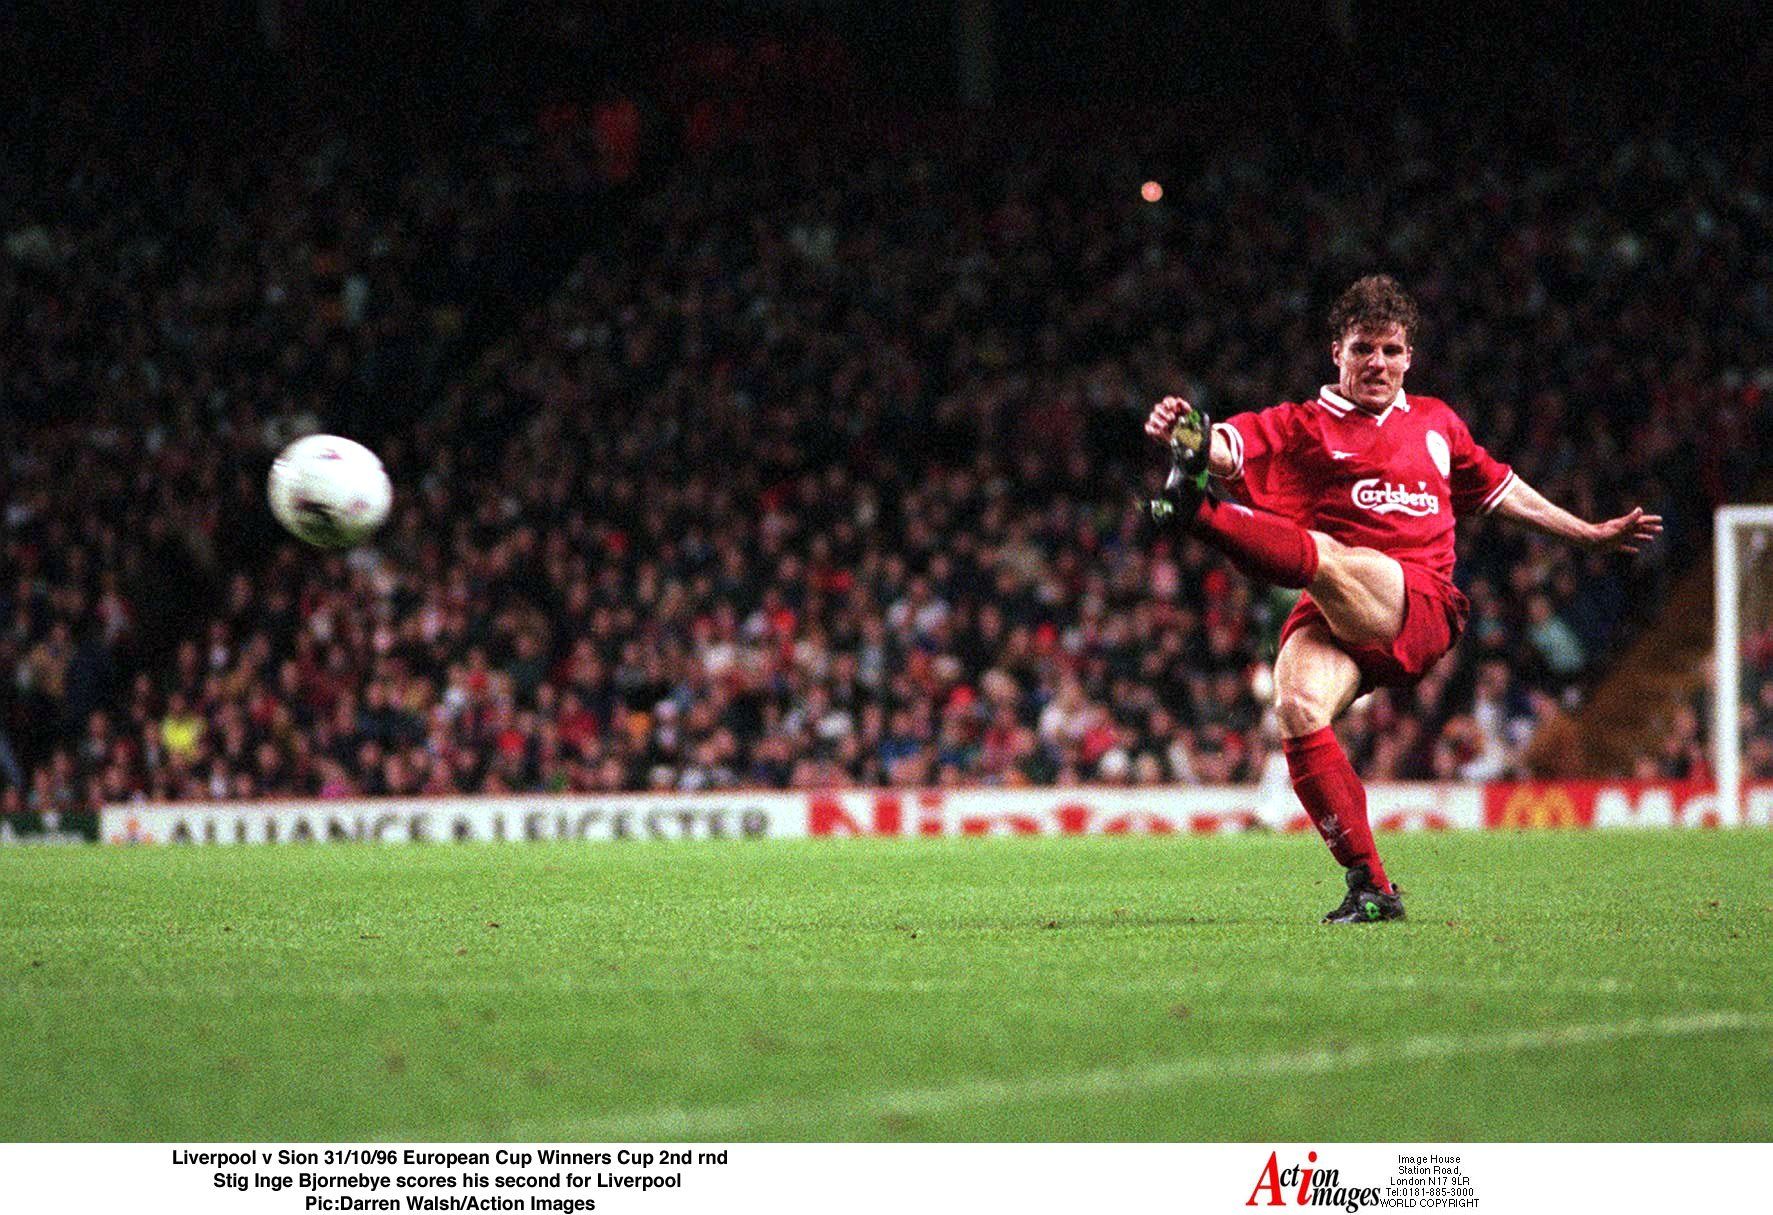 Liverpool v Sion 31/10/96 European Cup Winners Cup 2nd rnd 
Stig Inge Bjornebye scores his second for Liverpool  
Pic:Darren Walsh/Action Images